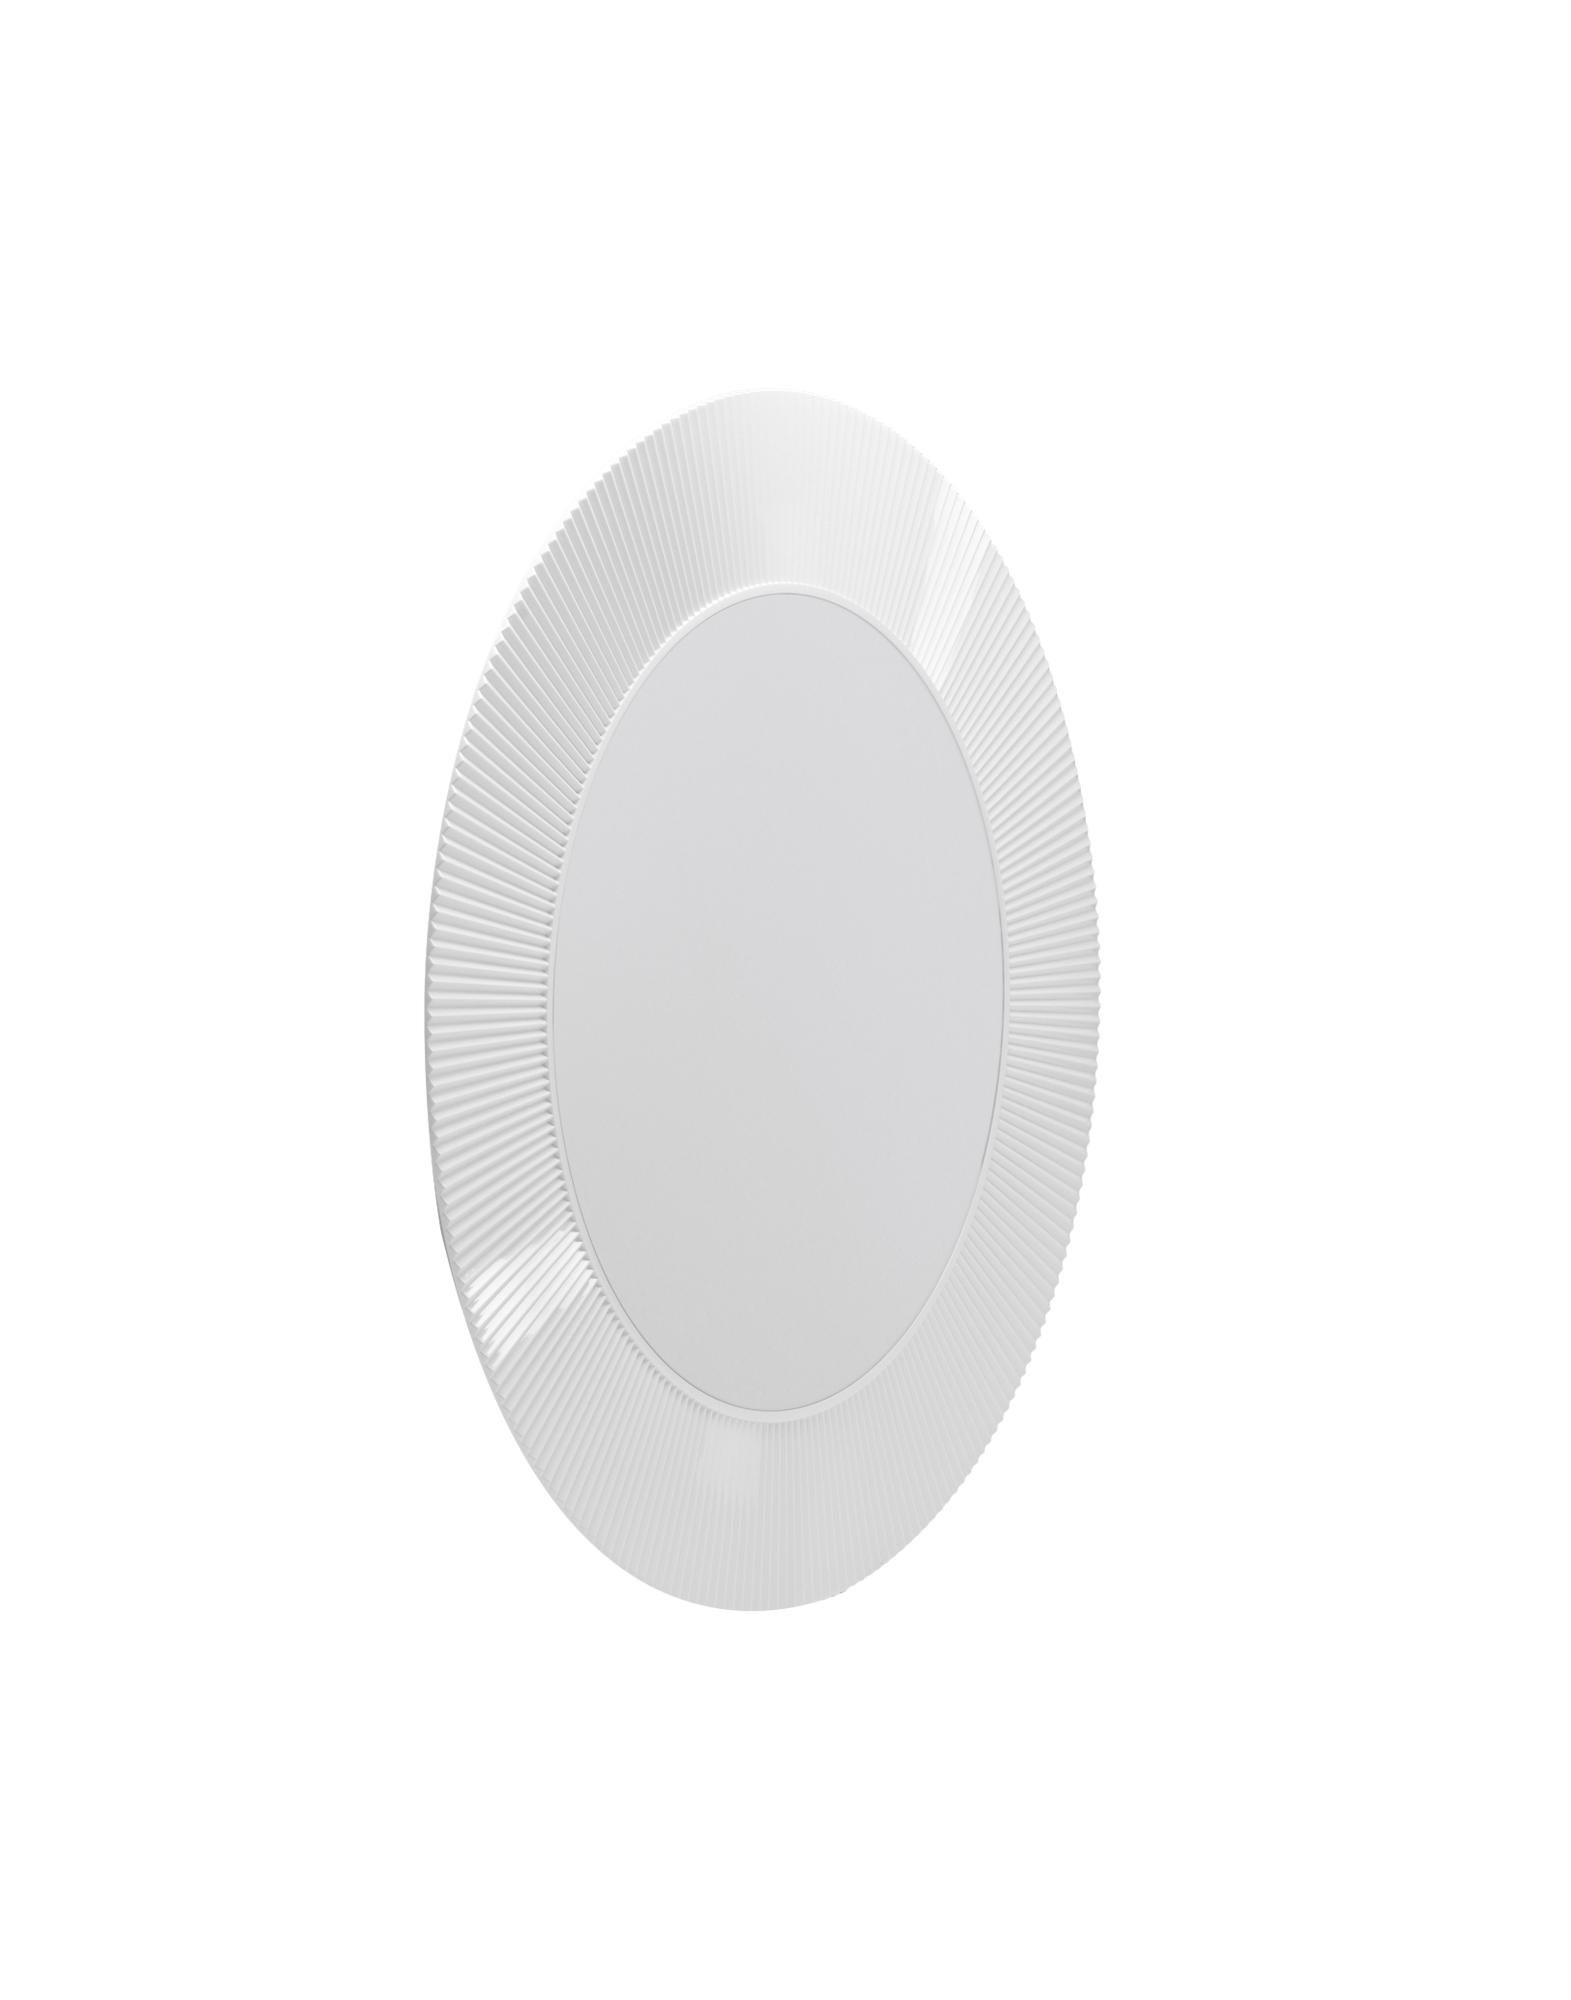 Round mirror with a transparent or colored PMMA frame, with a unique pleated effect. The possibility of applying transparency even to gold and chrome, makes this mirror an extremely versatile and transformational design piece, suitable for use in